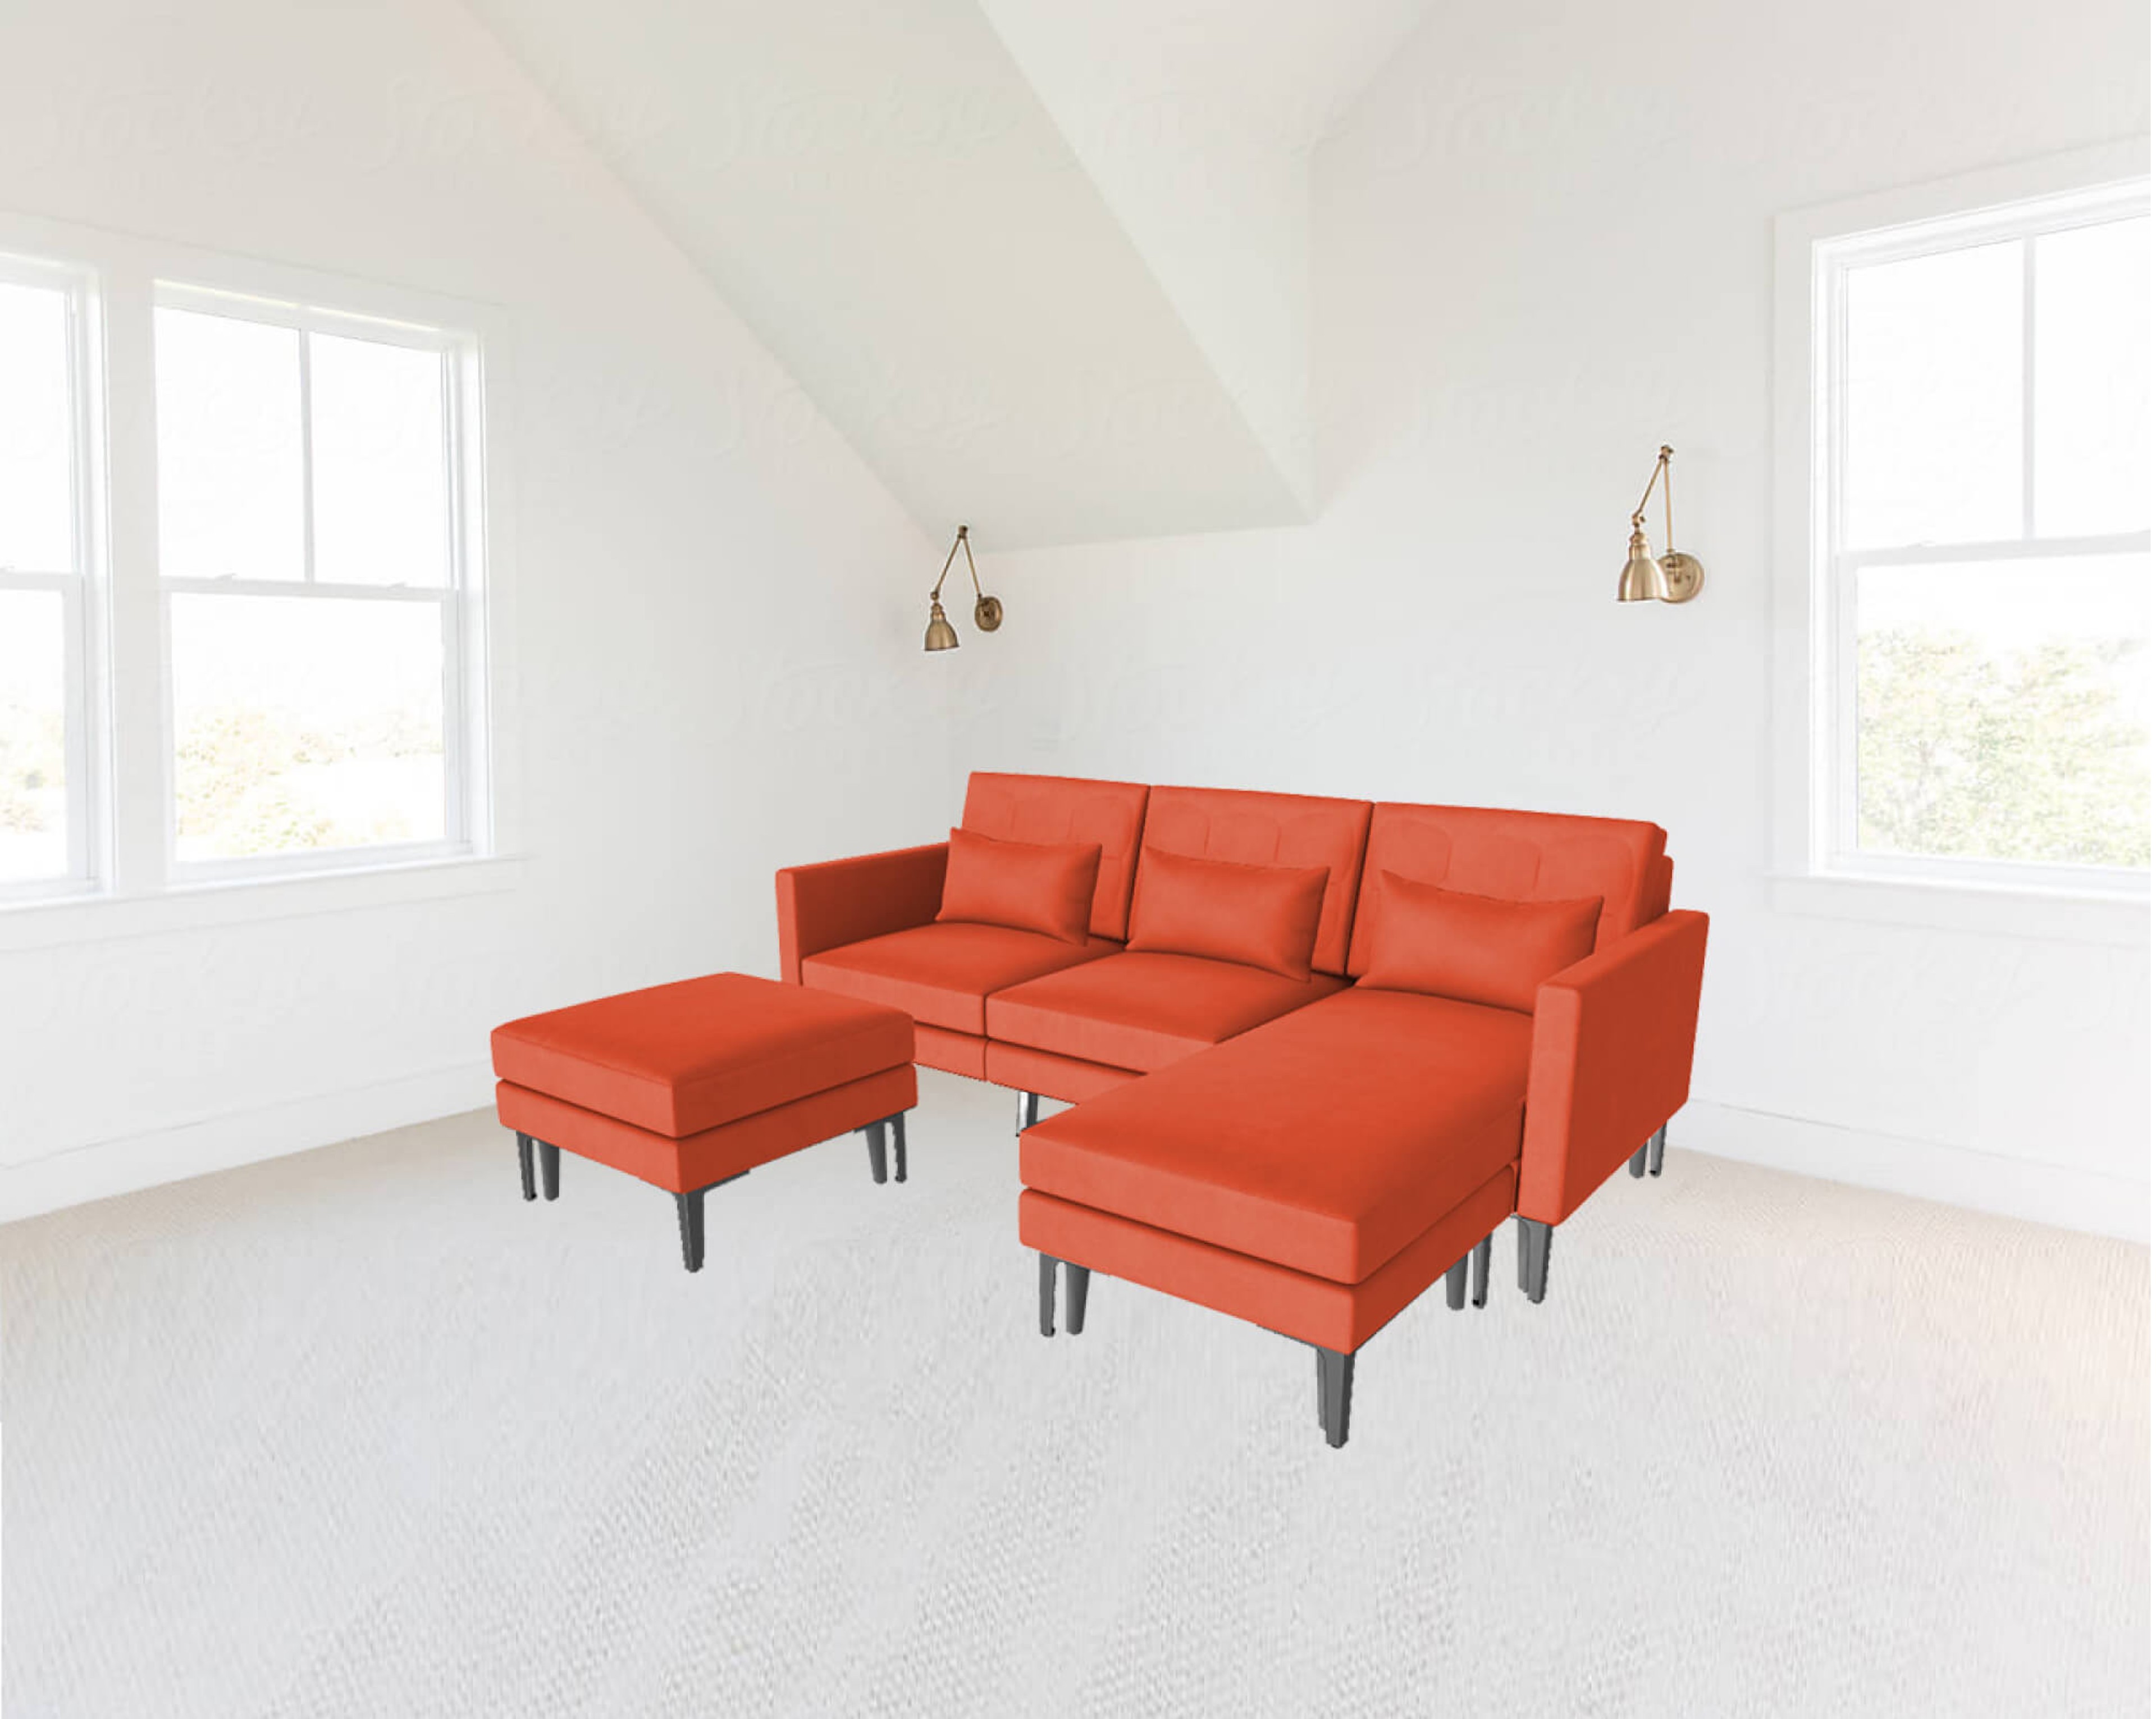 An orange AR couch sitting in a white room.